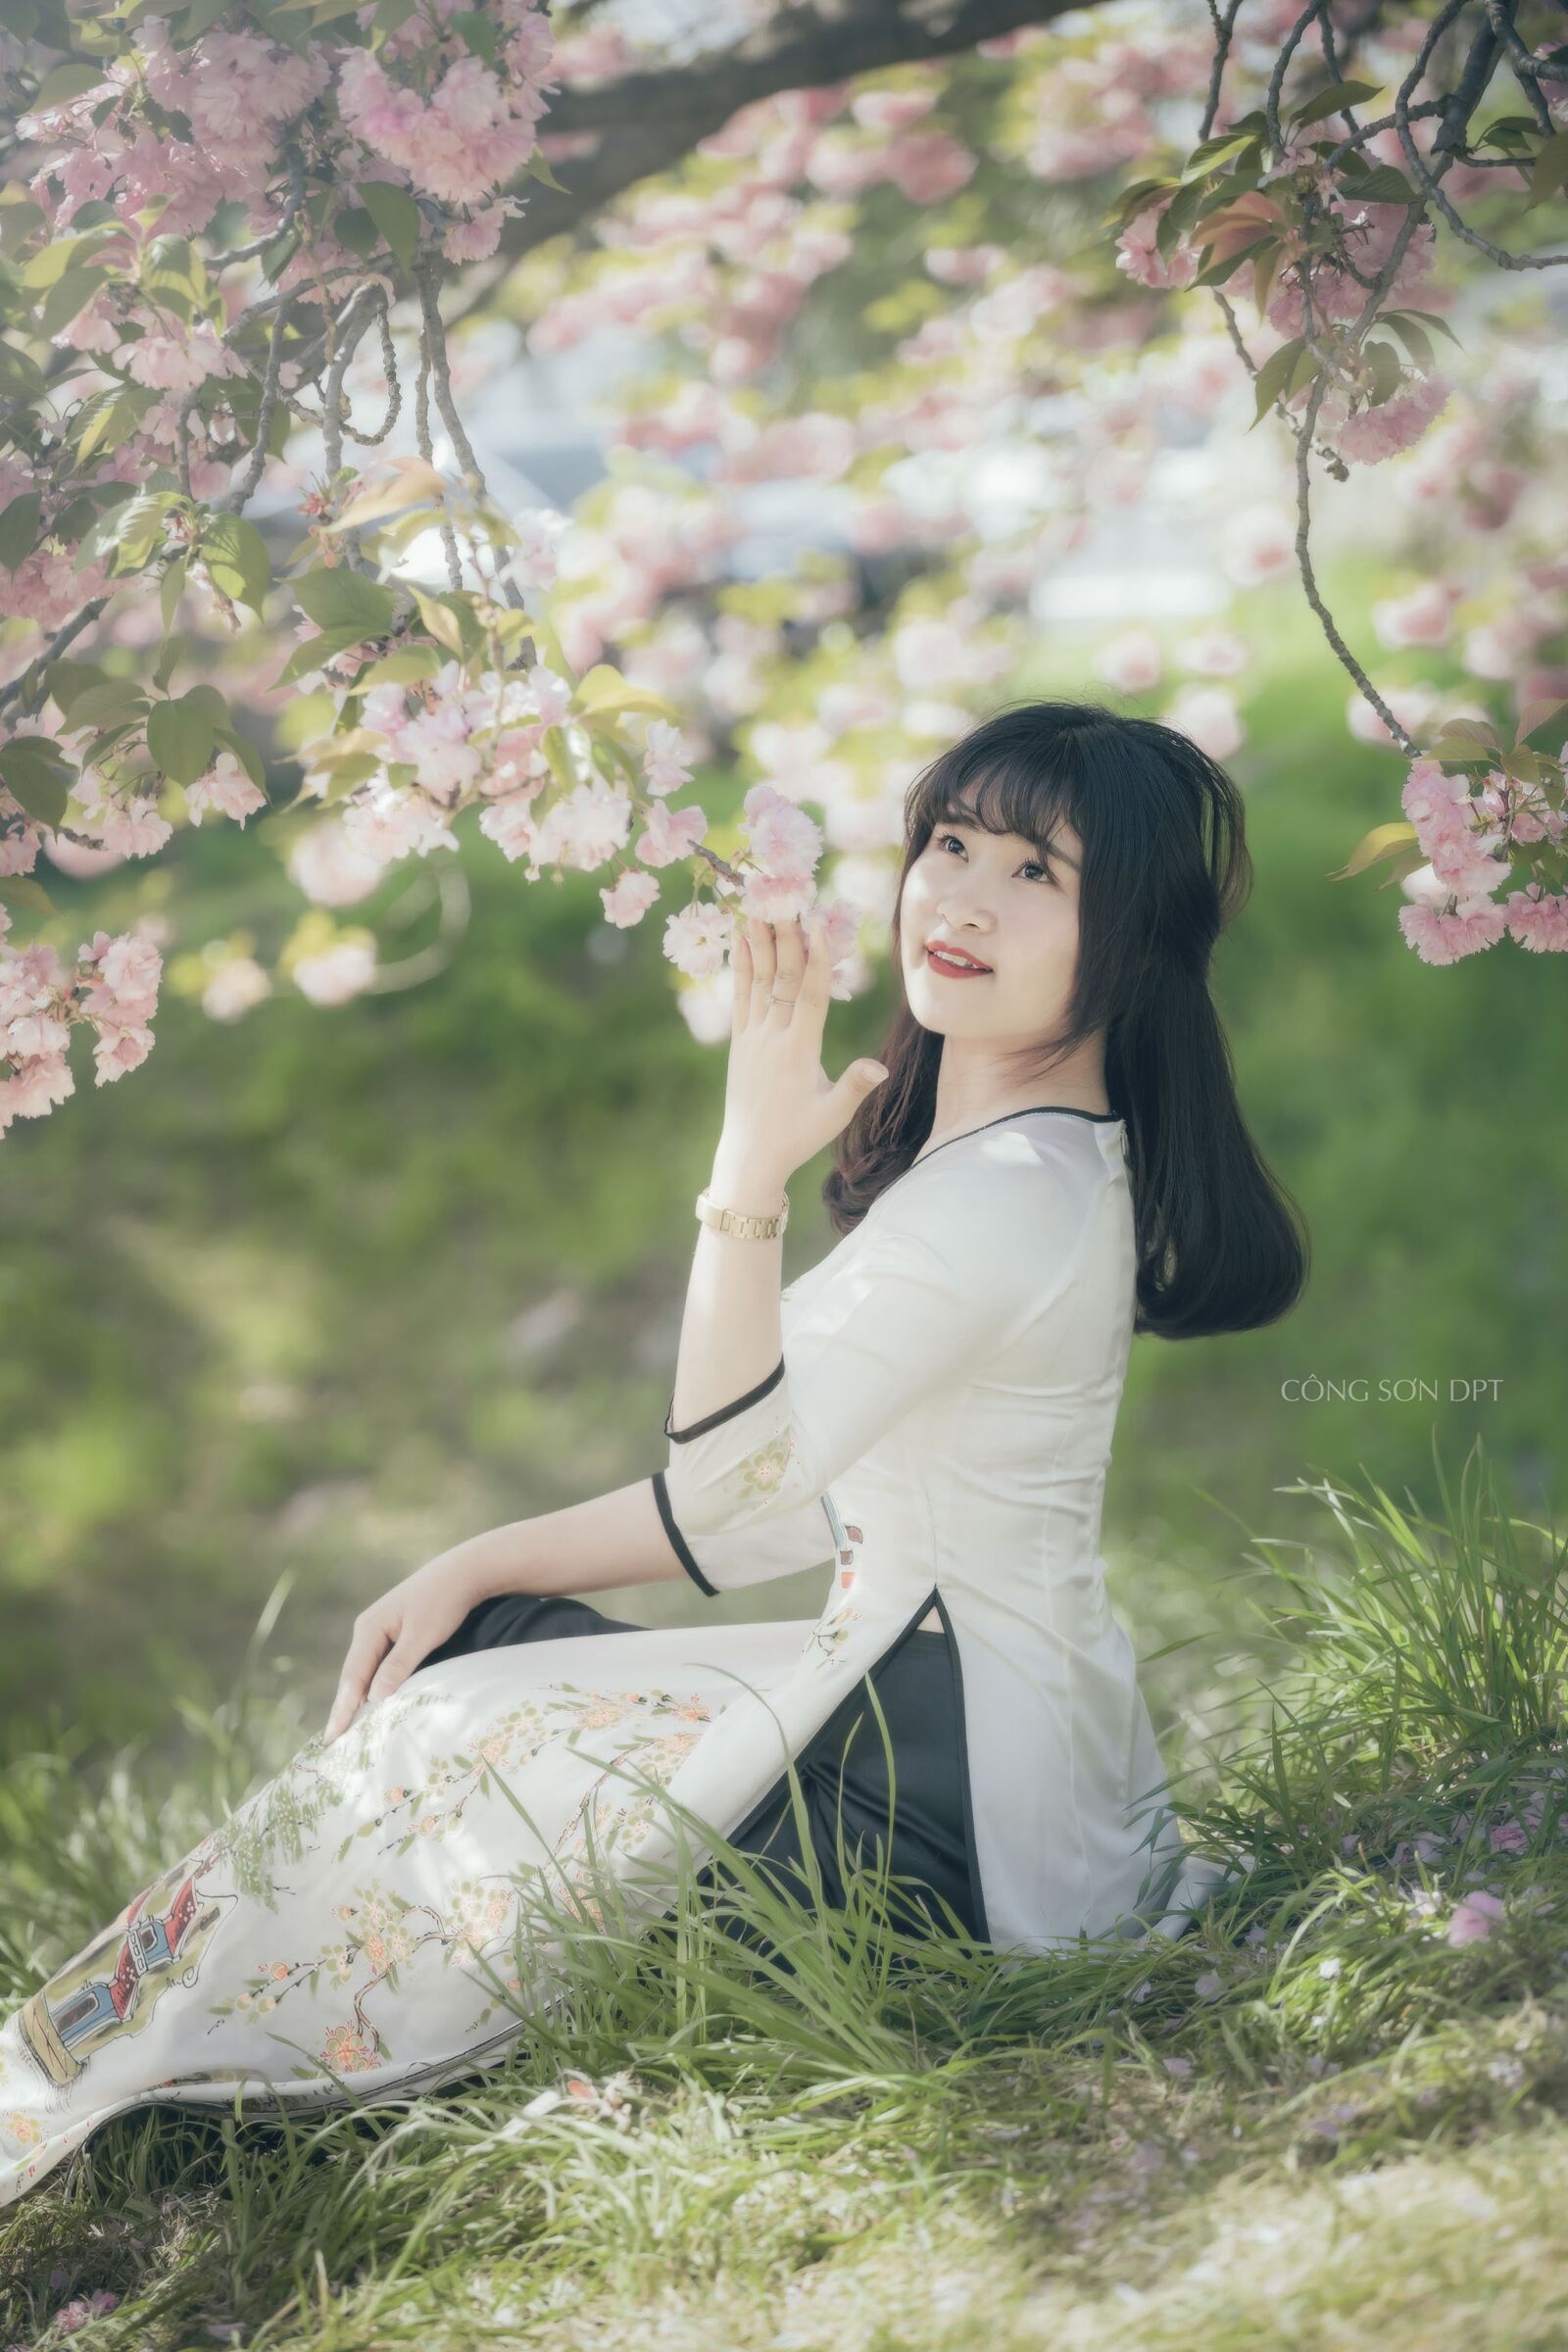 Sony a7 II + Sony DT 50mm F1.8 SAM sample photo. Flower, brother, dao photography